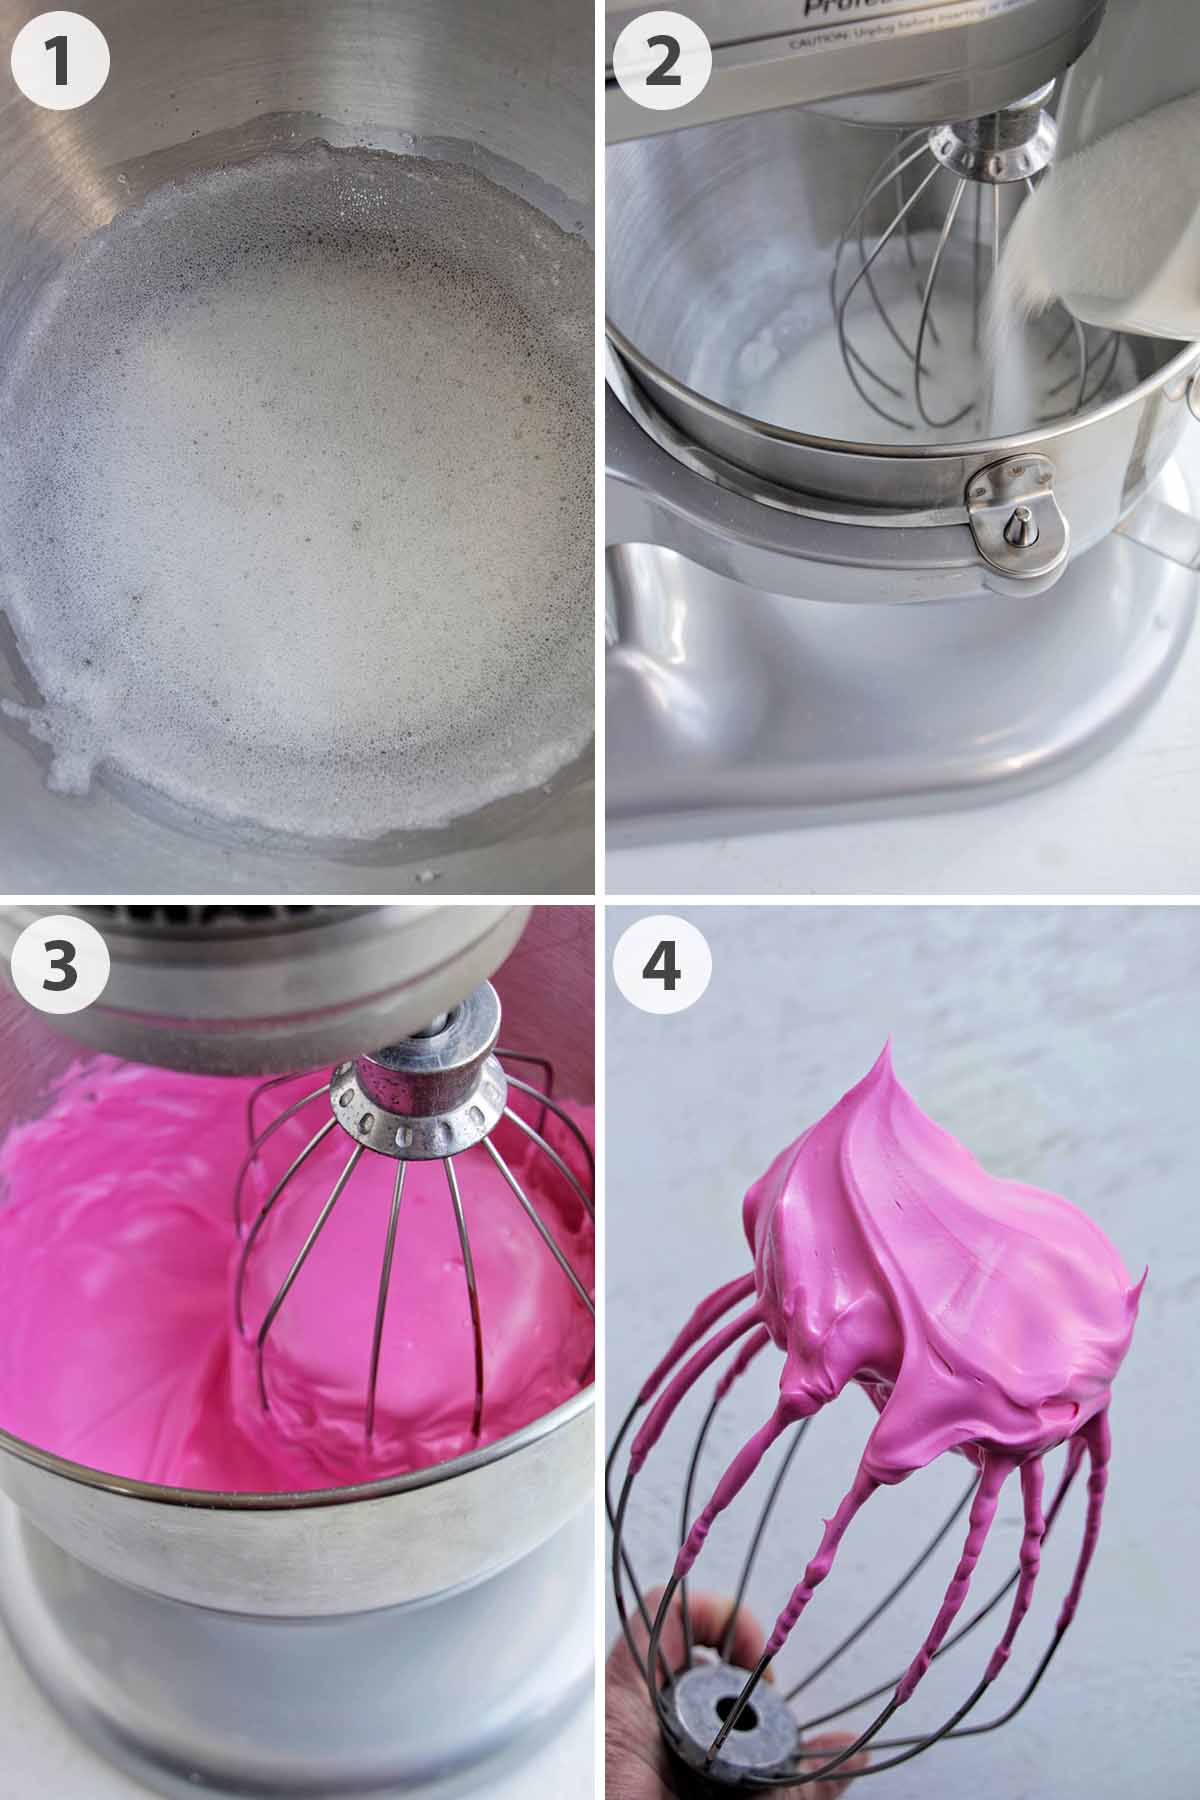 four numbered photos showing how to make hot pink meringue for macarons.